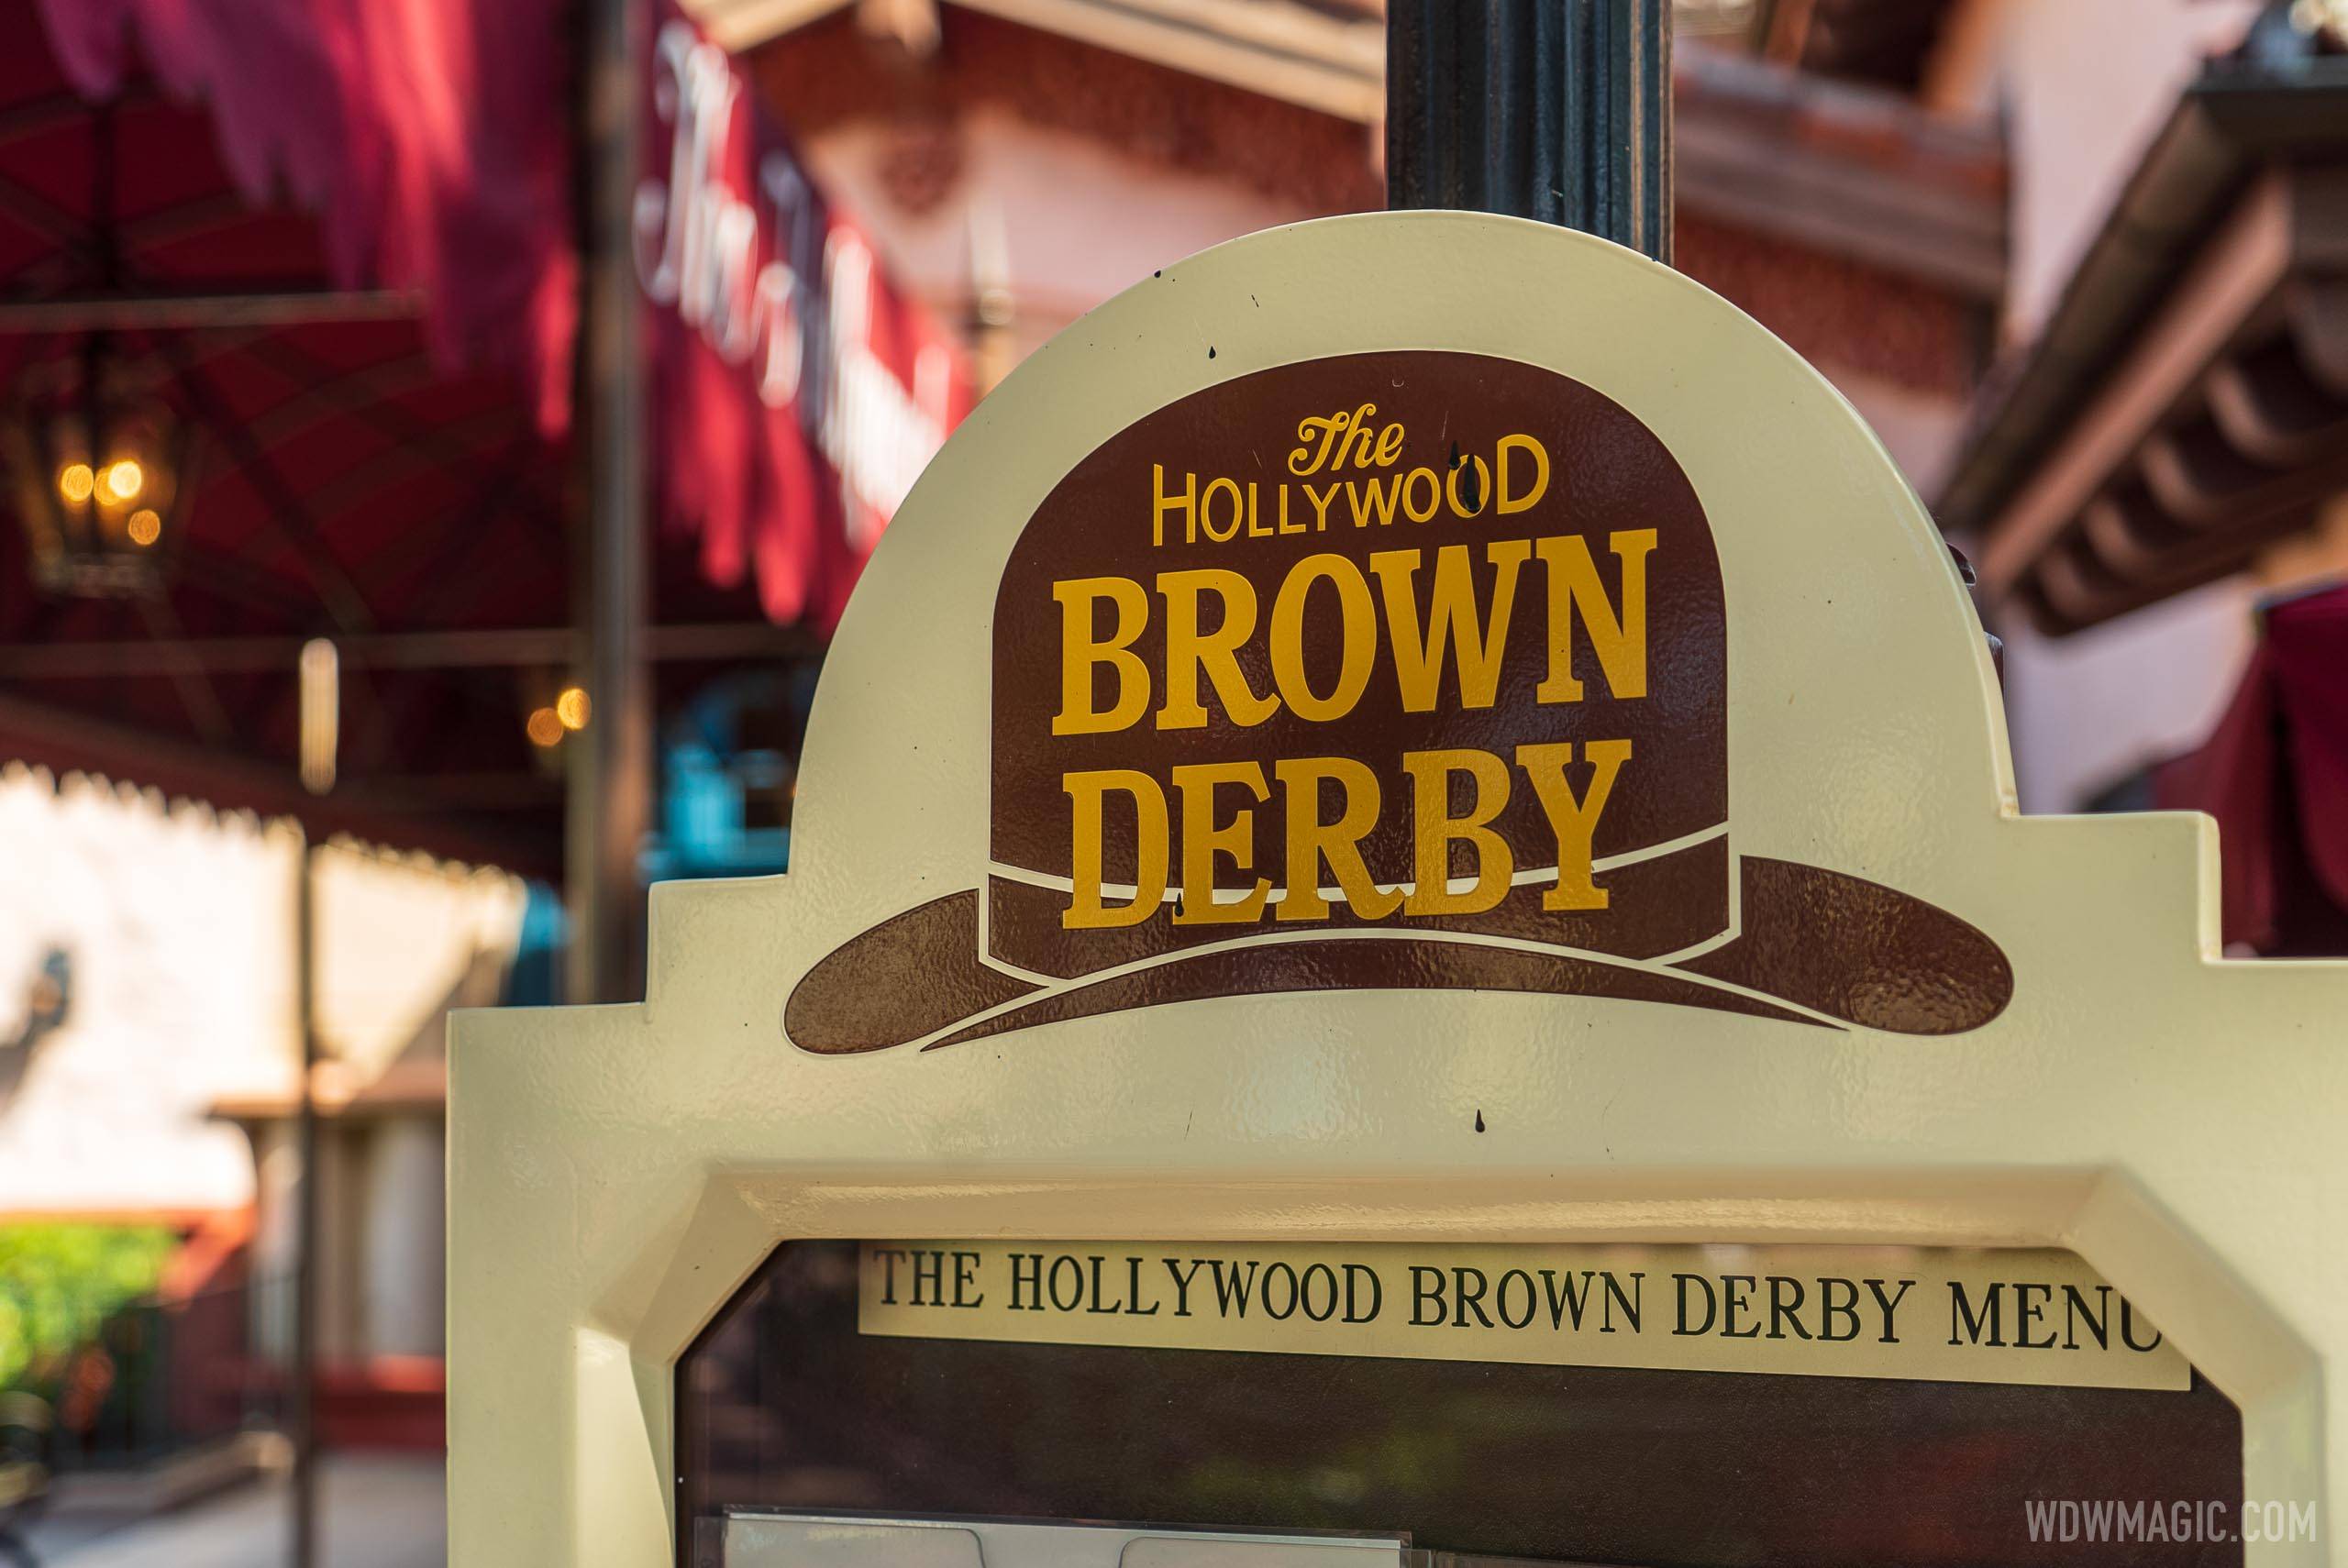 The Hollywood Brown Derby overview